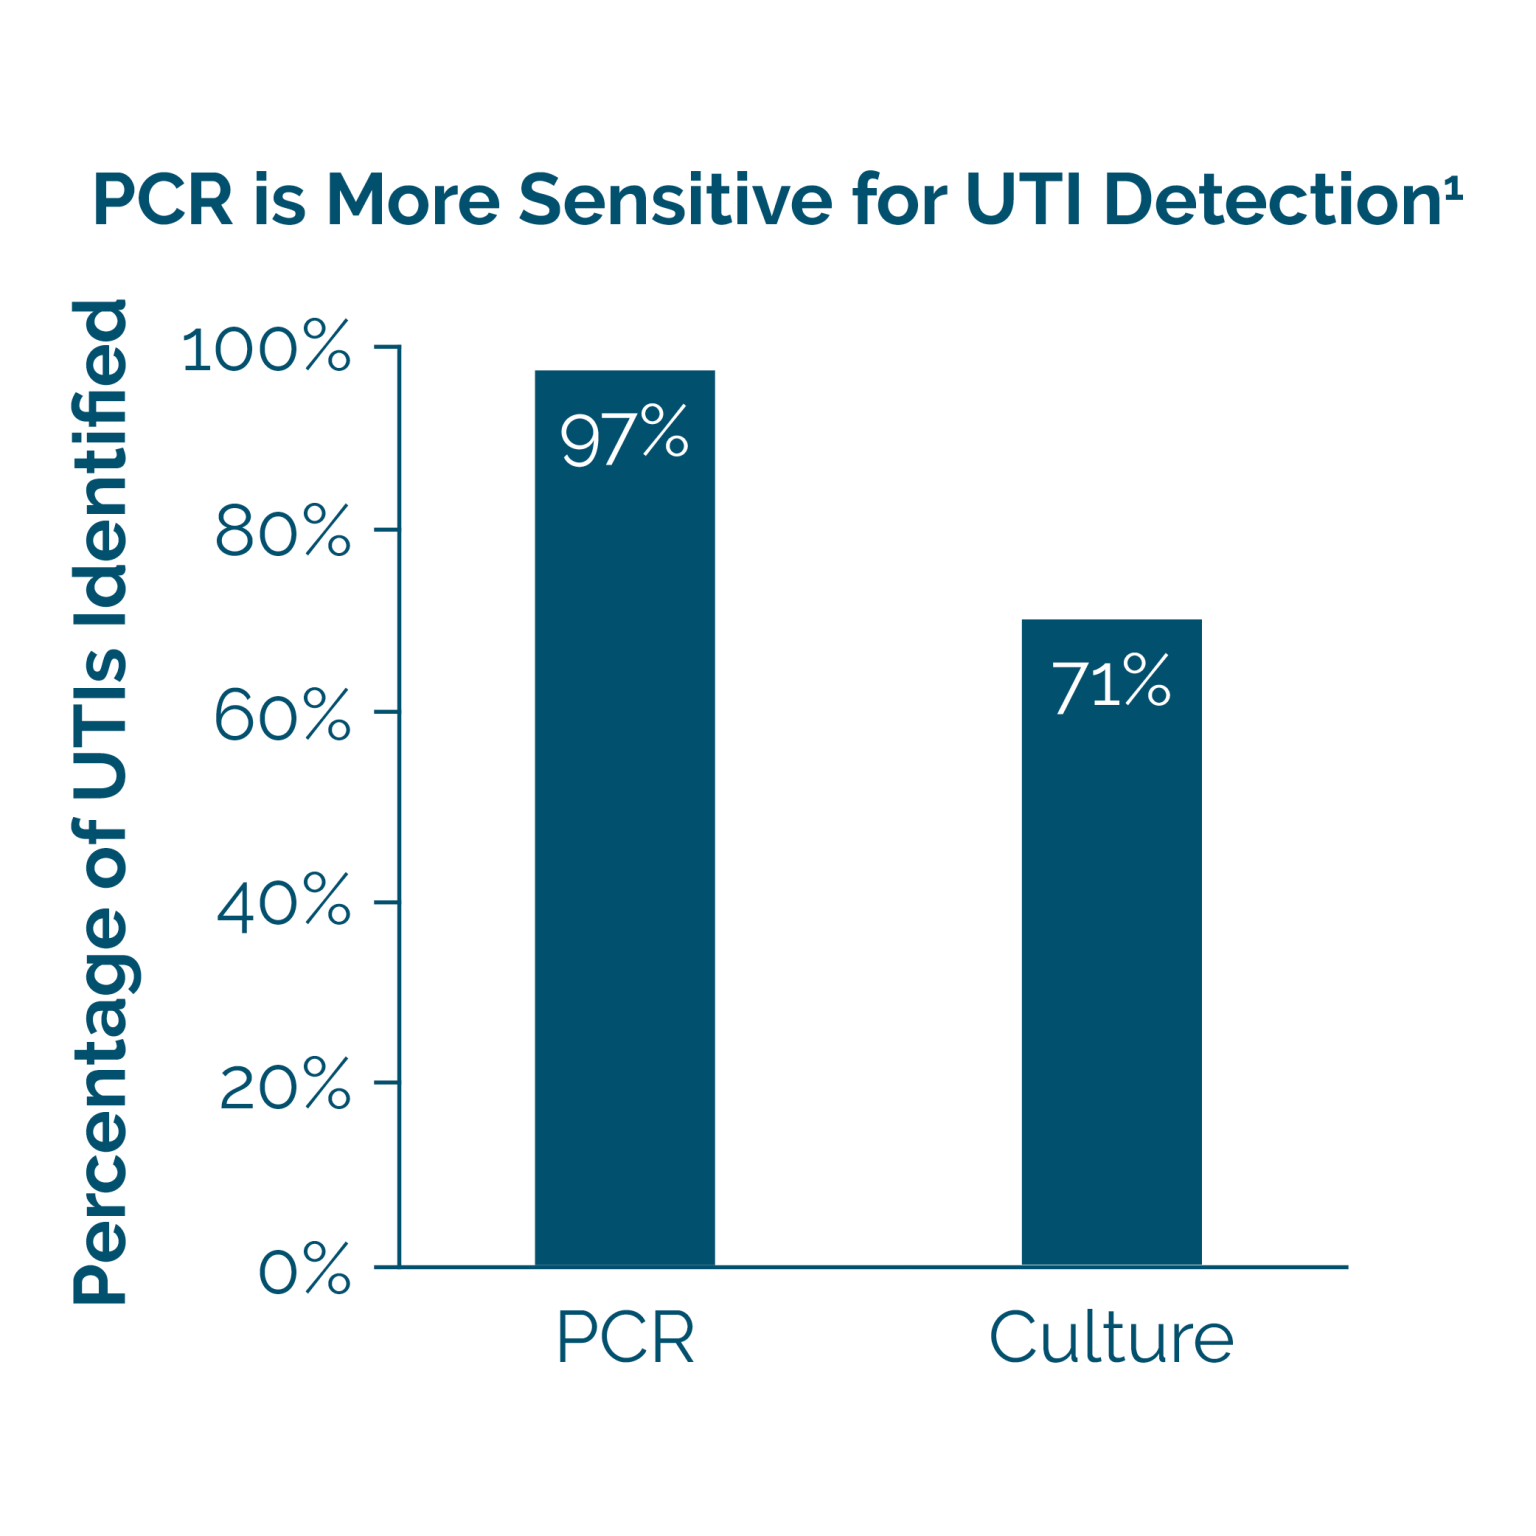 PCR is more sensitive for UTI detection. 97% of UTIs are identified with PCR